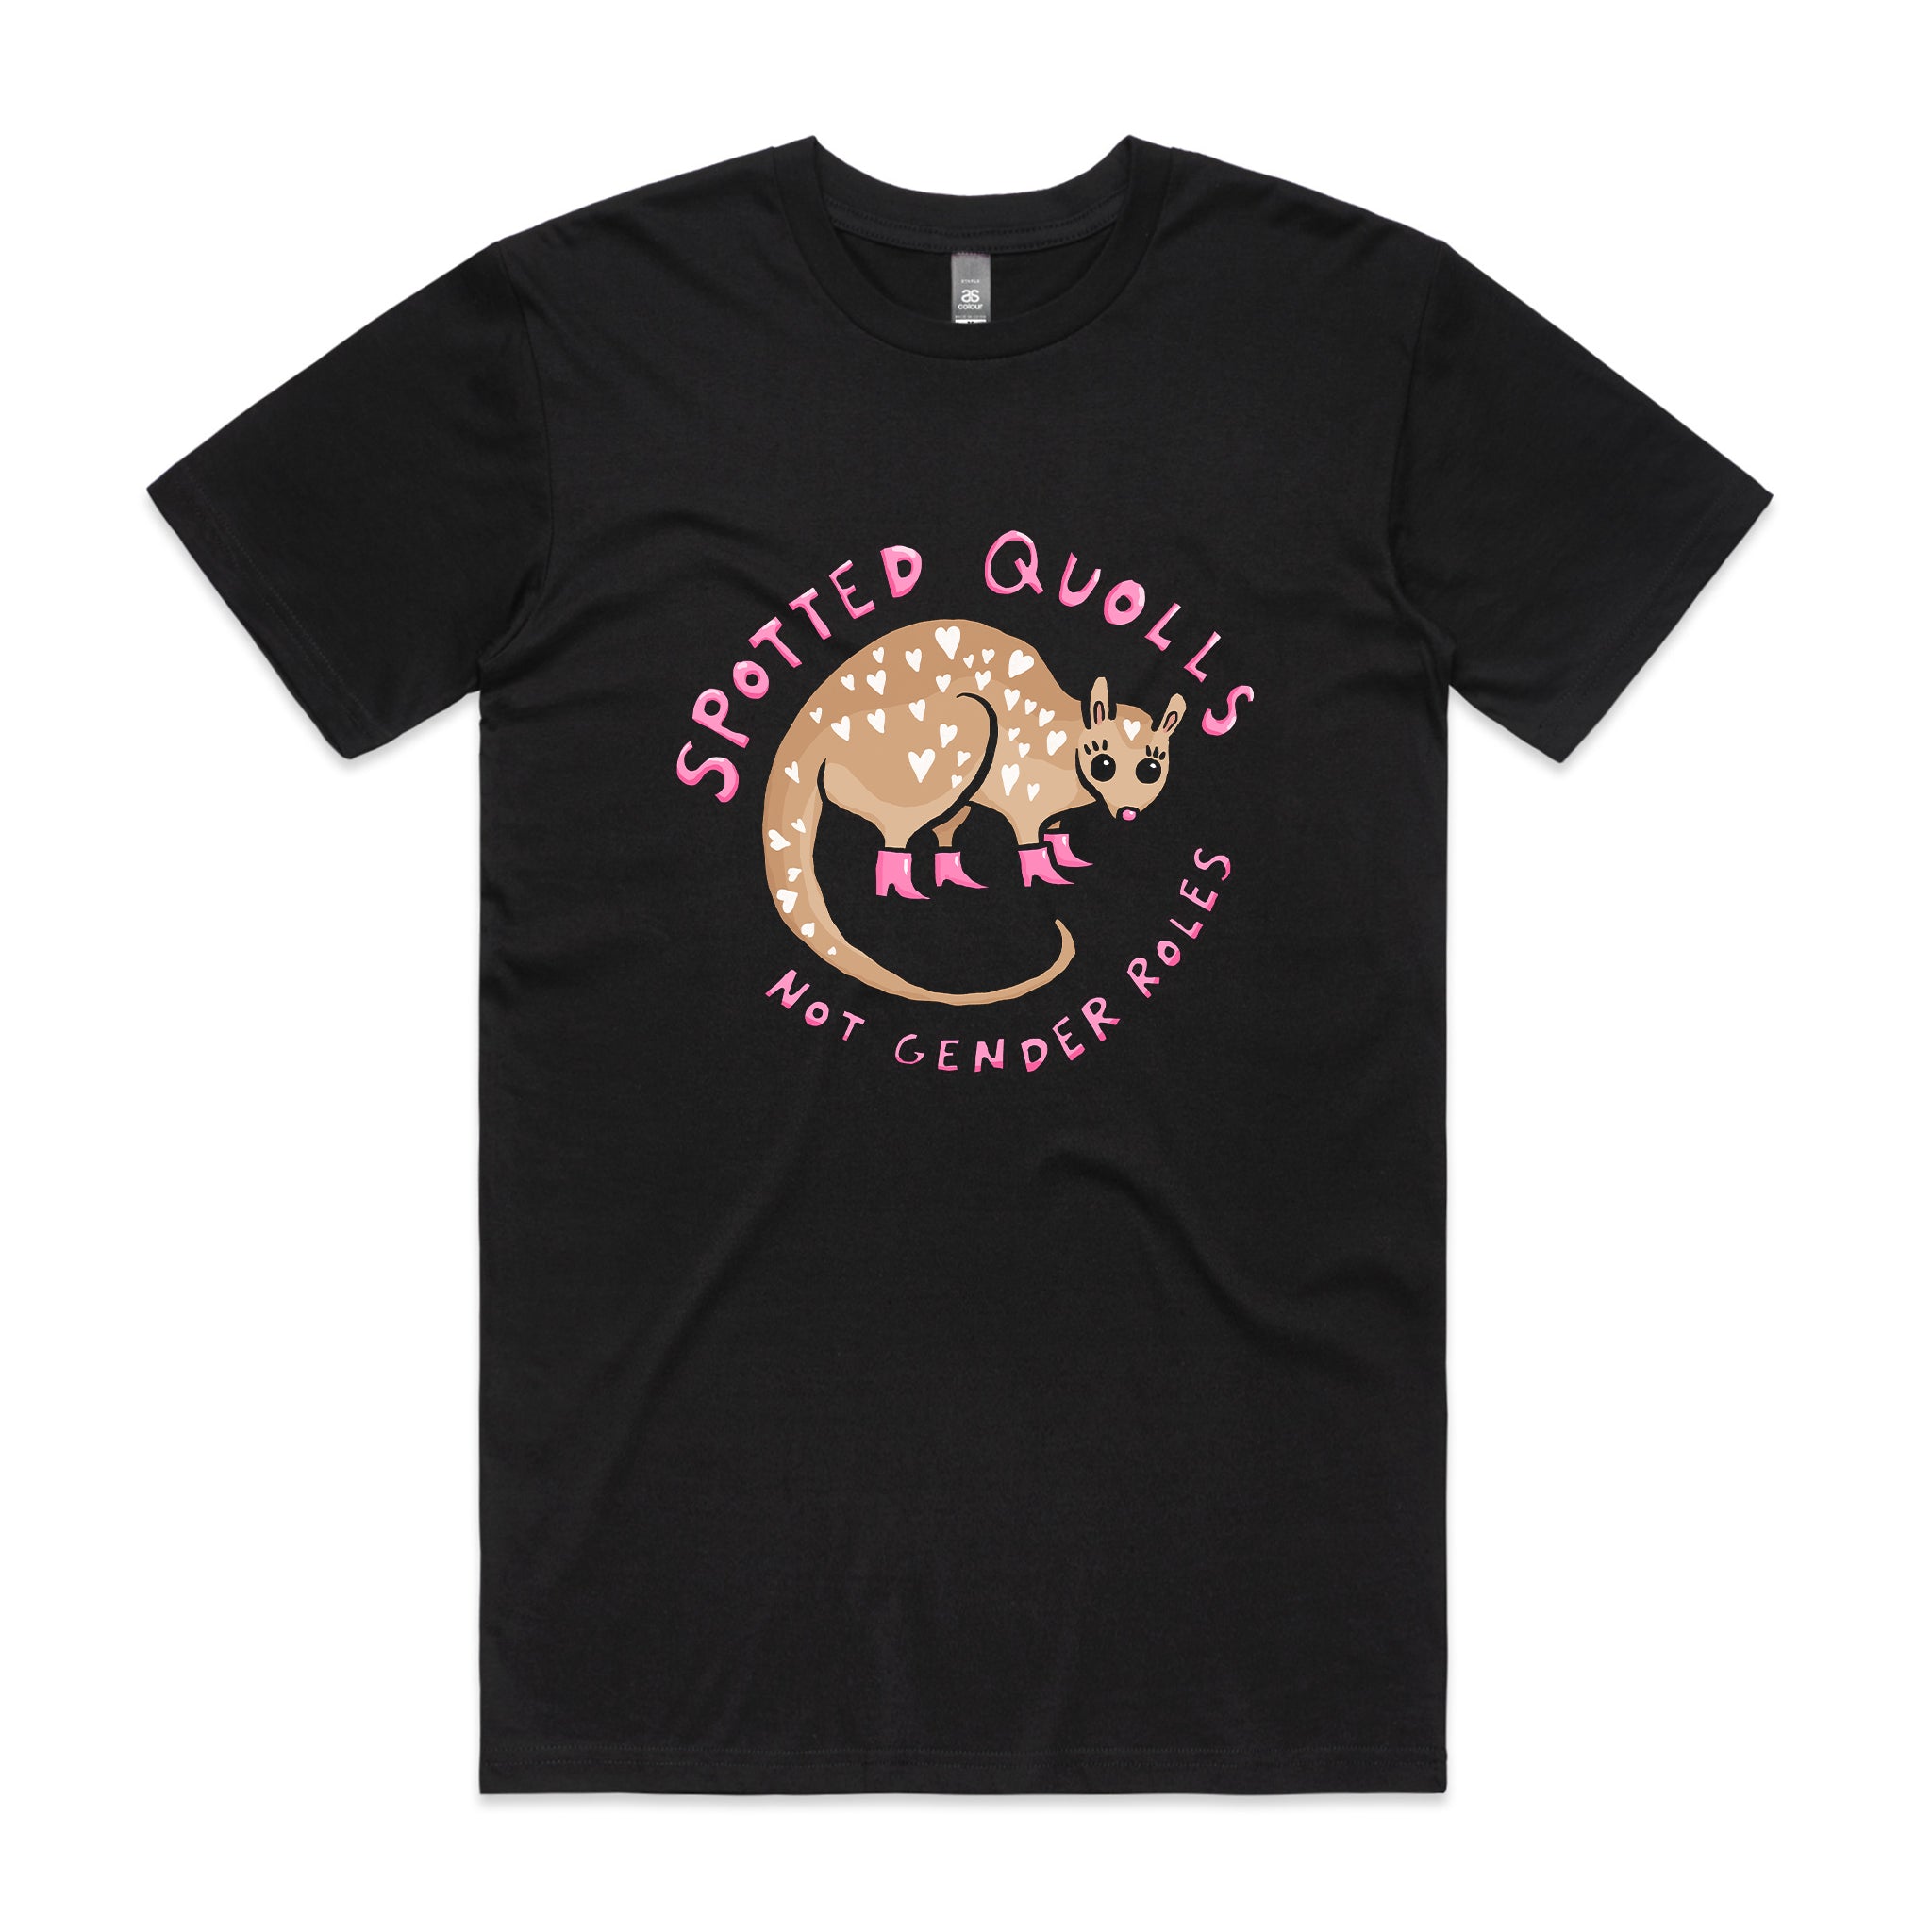 Spotted Quolls Tee